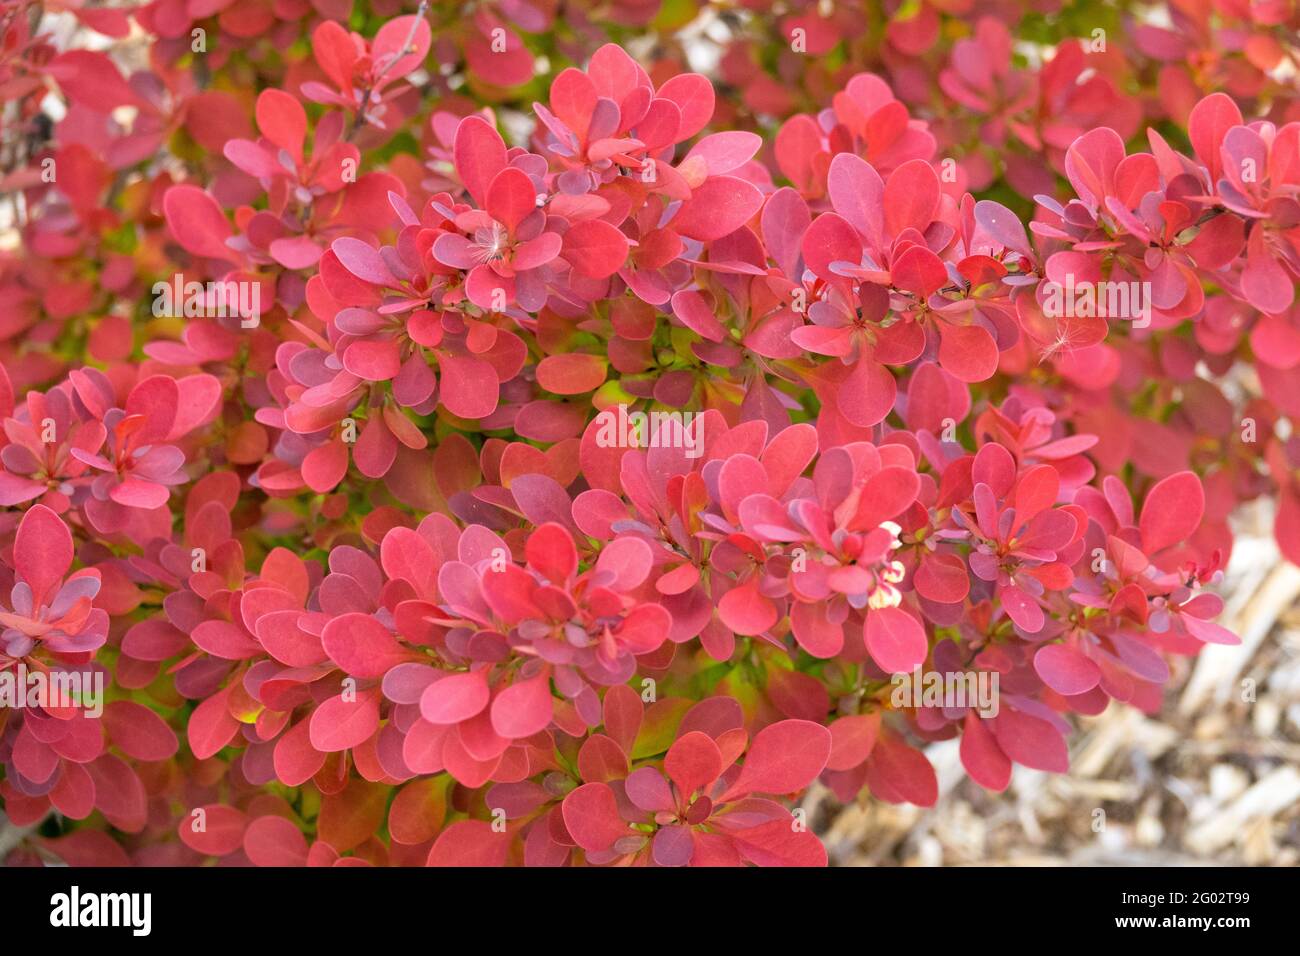 Berberis Red Compact Red Japanese Barberry Shrub Leaves Foliage Spring Deciduous Plant Stock Photo